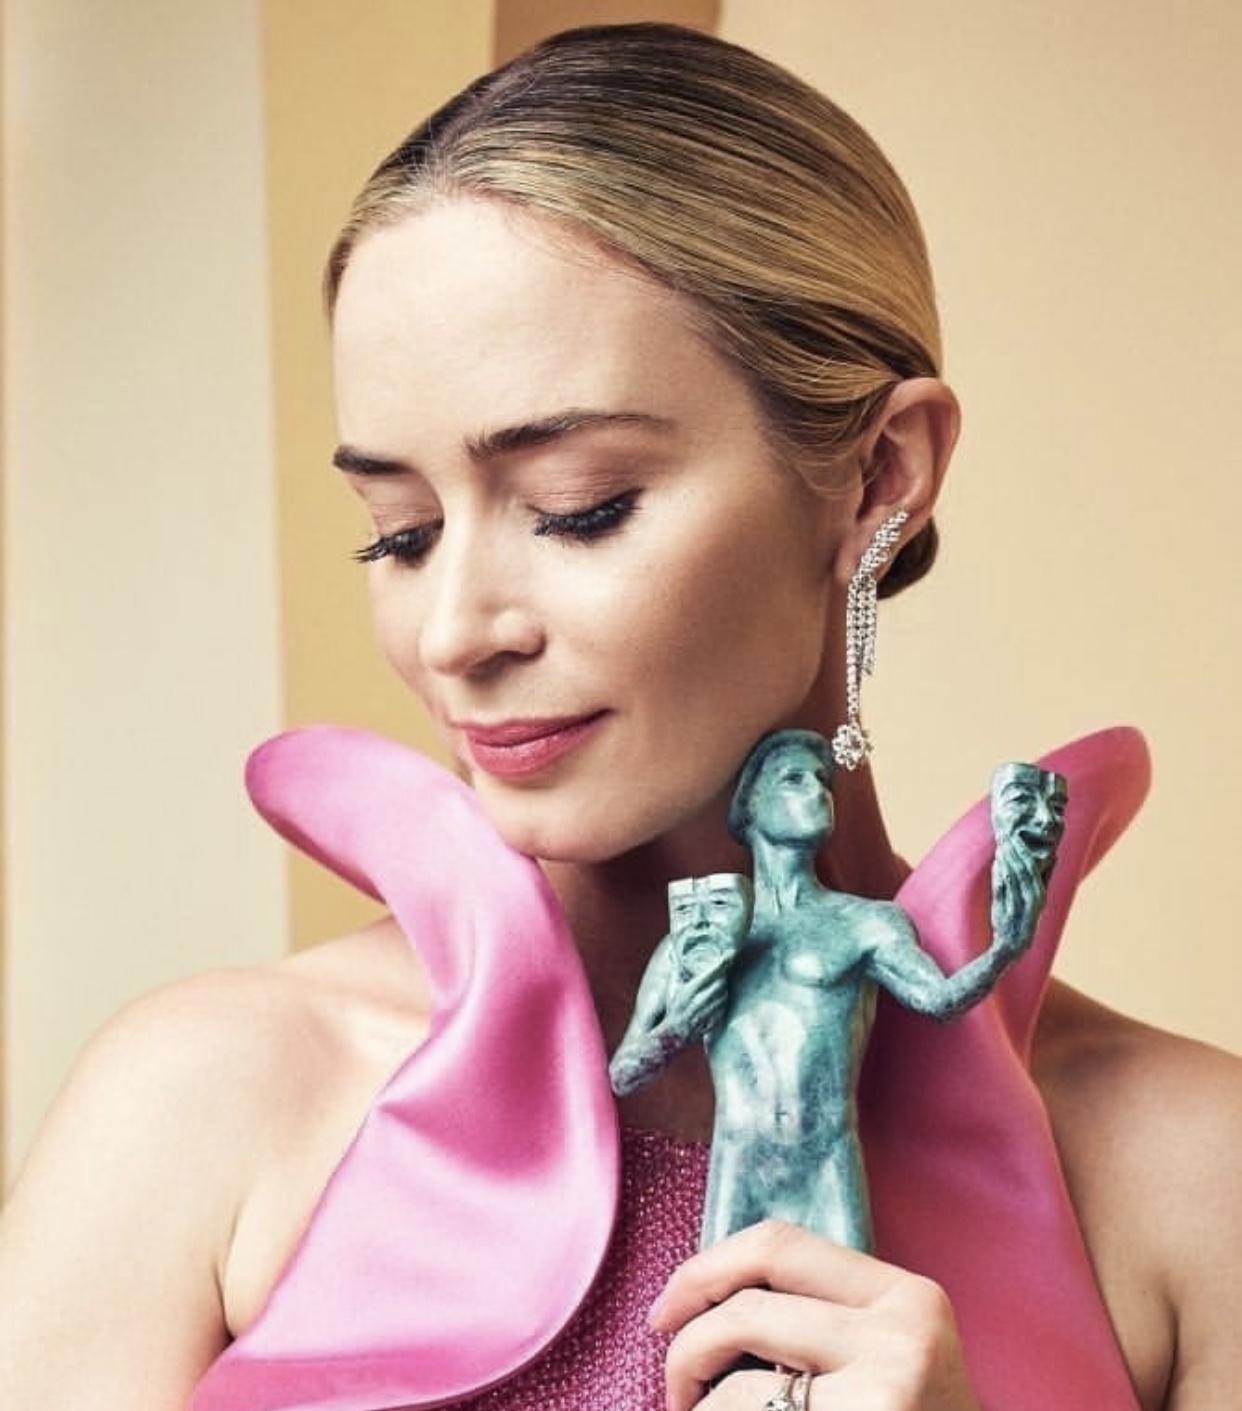 Emily Blunt x The 25th Annual Screen Actors Guild Awards, Winner for Outstanding Performance by a Female Actor in a Supporting Role, A Quiet Place